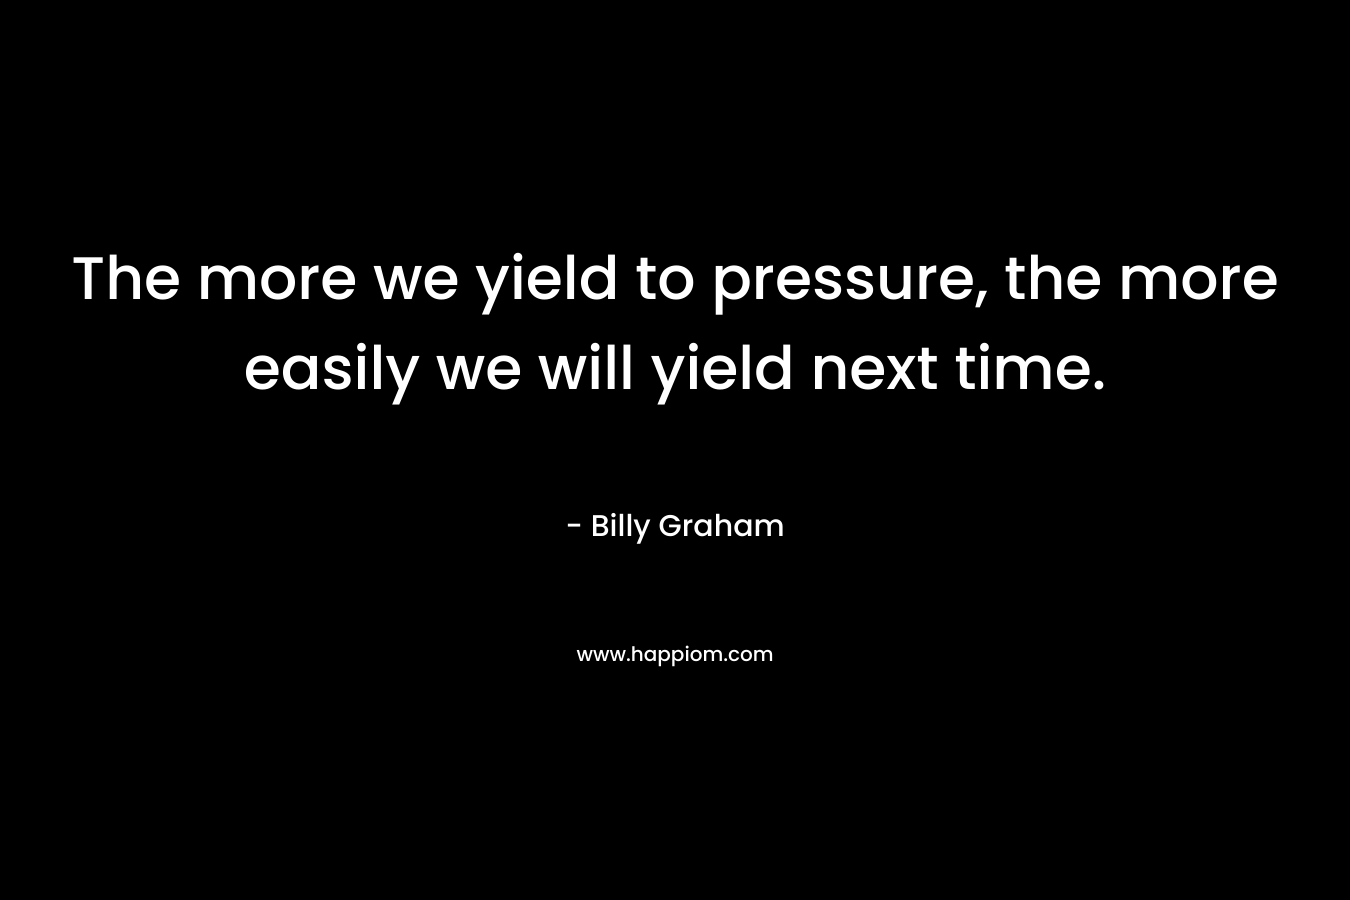 The more we yield to pressure, the more easily we will yield next time.